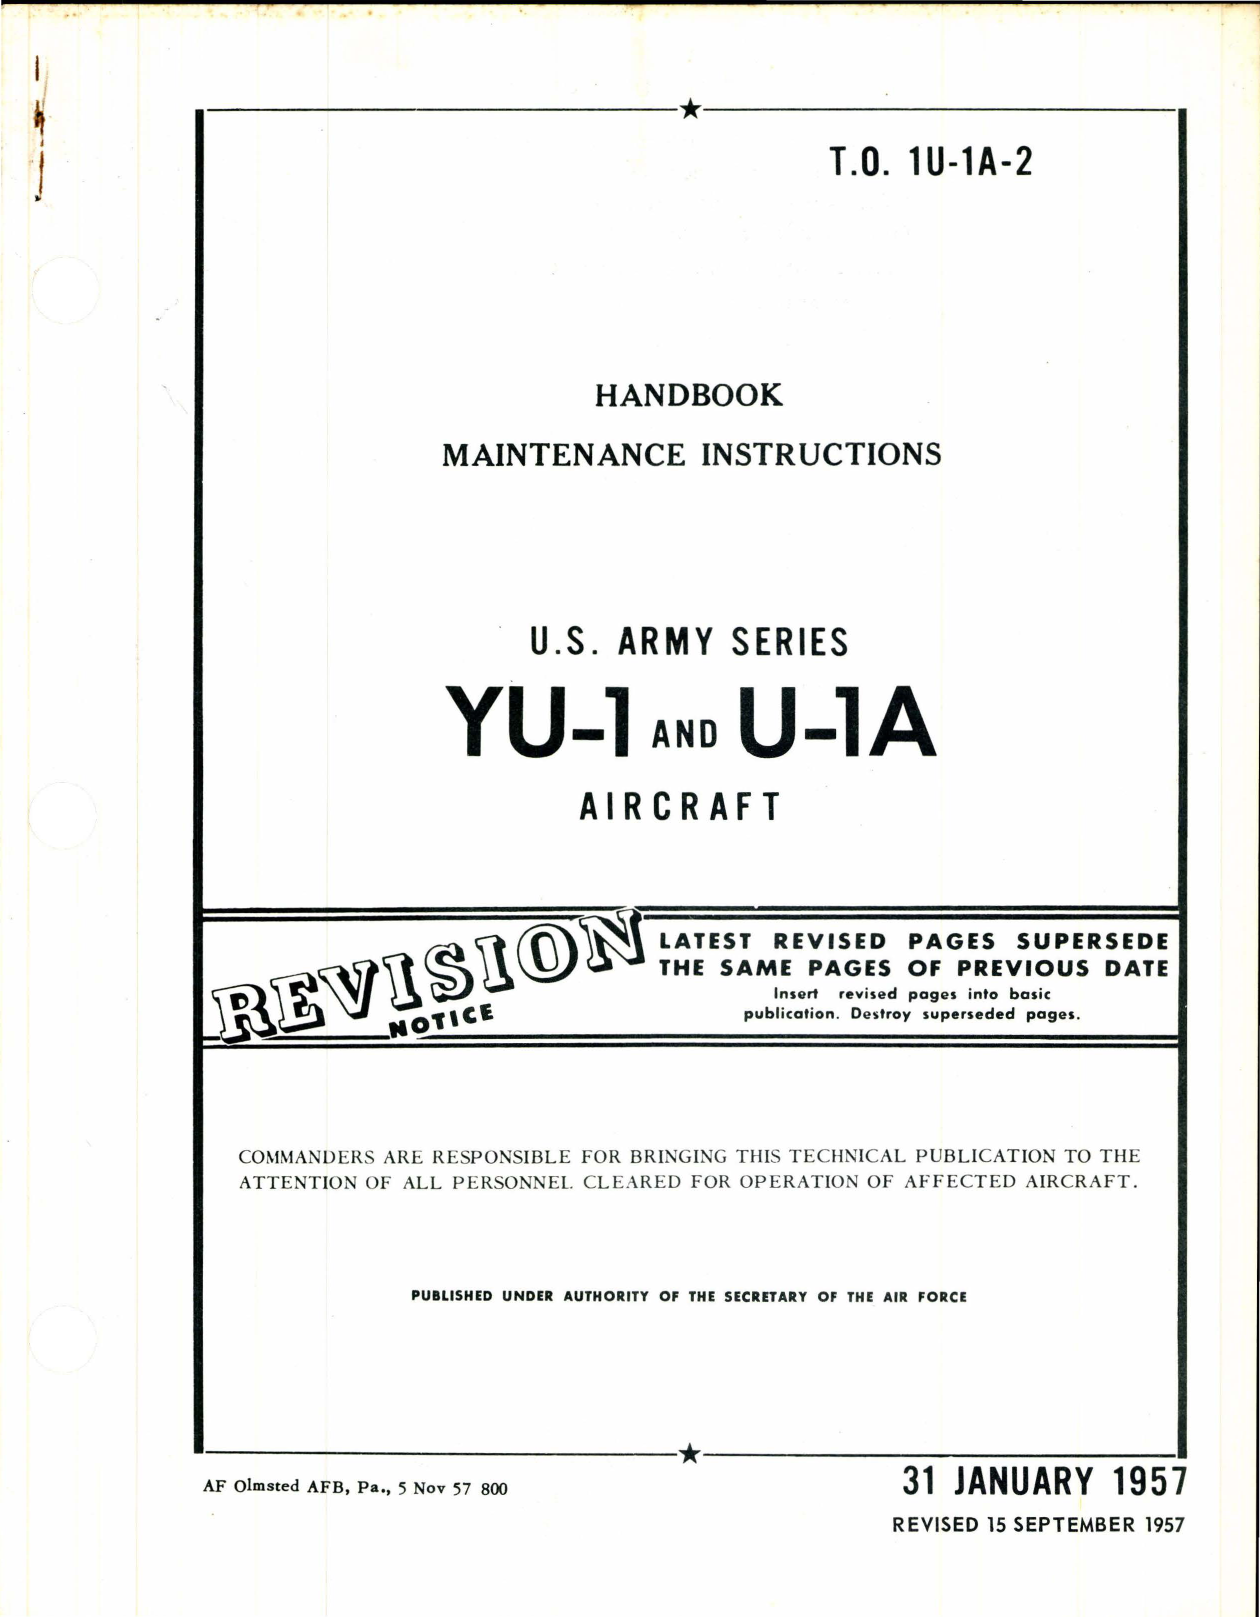 Sample page 1 from AirCorps Library document: Maintenance Instructions for YU-1 and U-1A